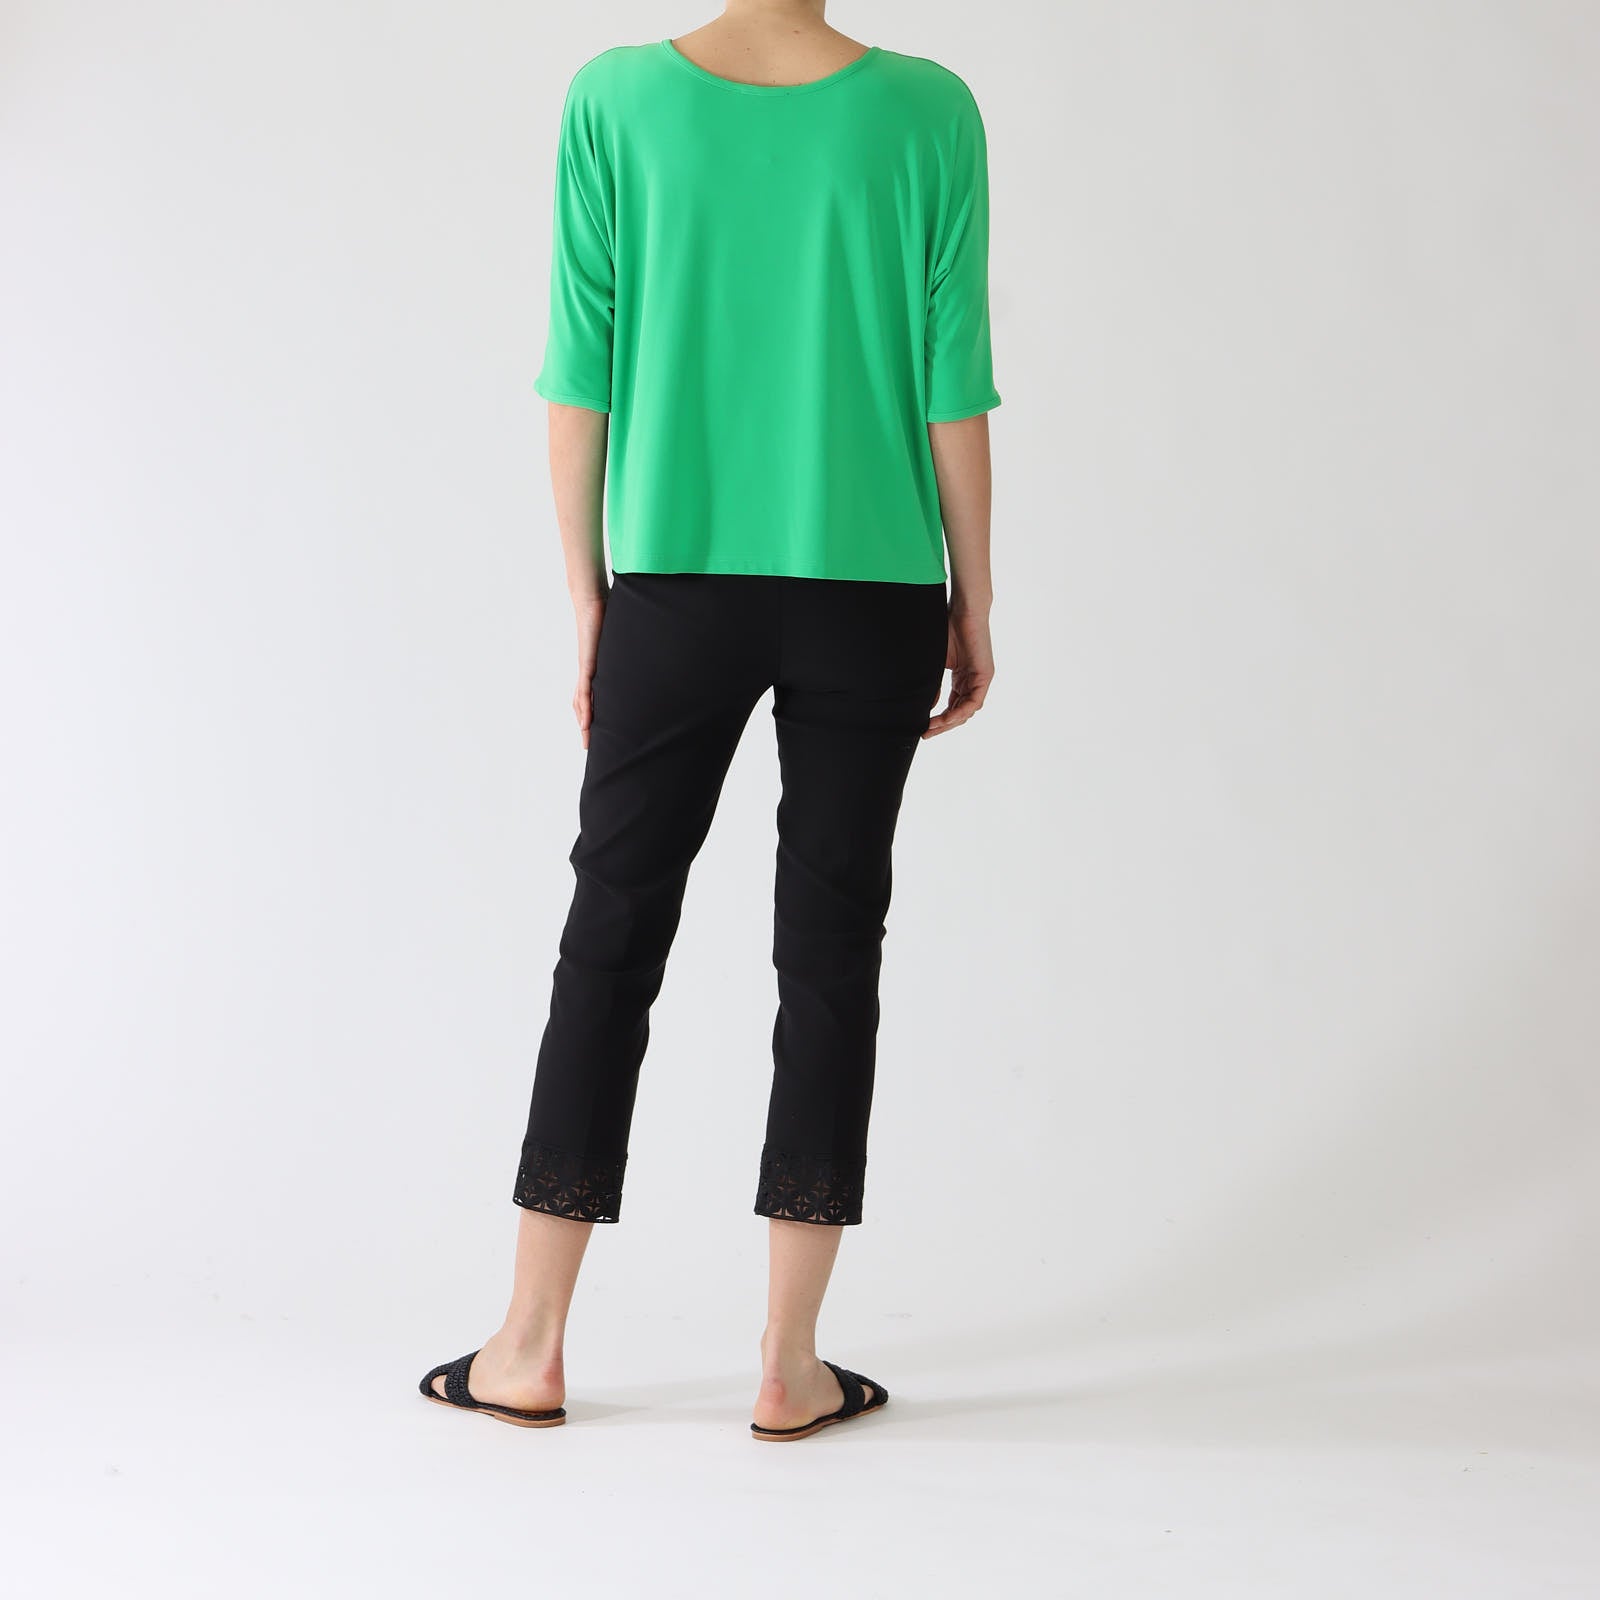 Island Green Relaxed V-Neck Top